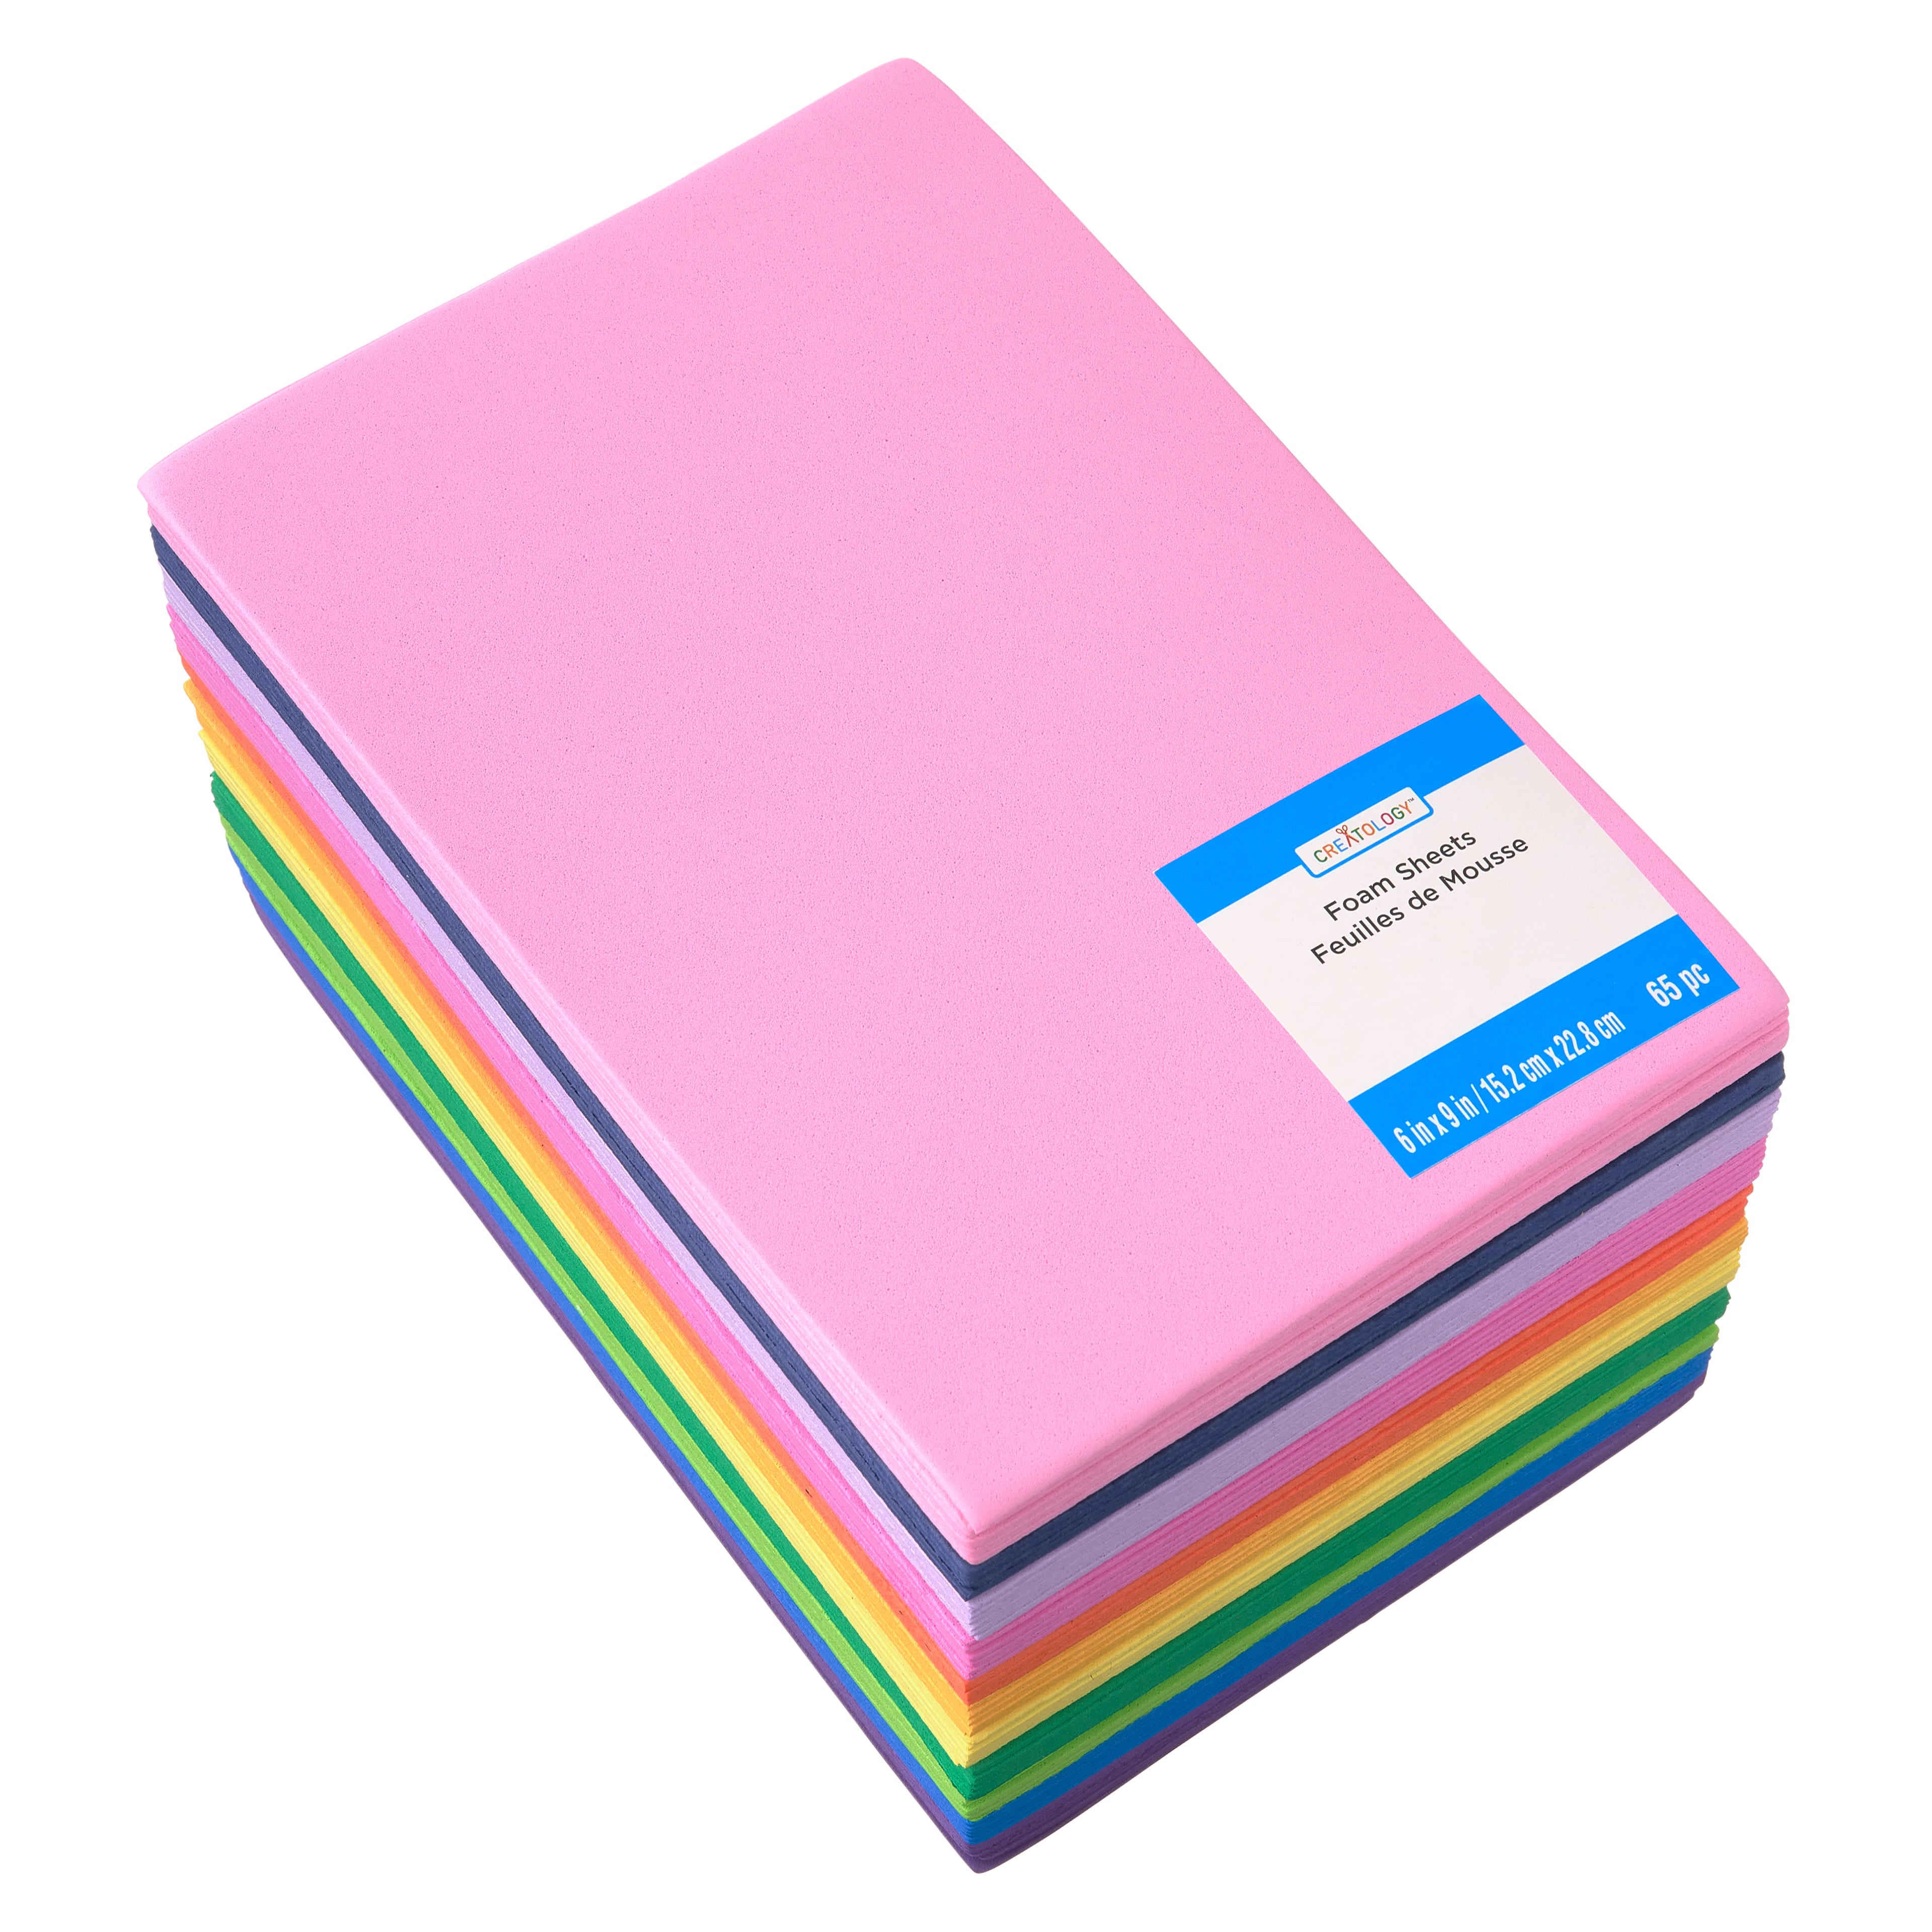 Michaels Bulk 12 Packs: 65 Ct. (780 Total) Foam Sheets by Creatology, Size: 6 x 9, Assorted